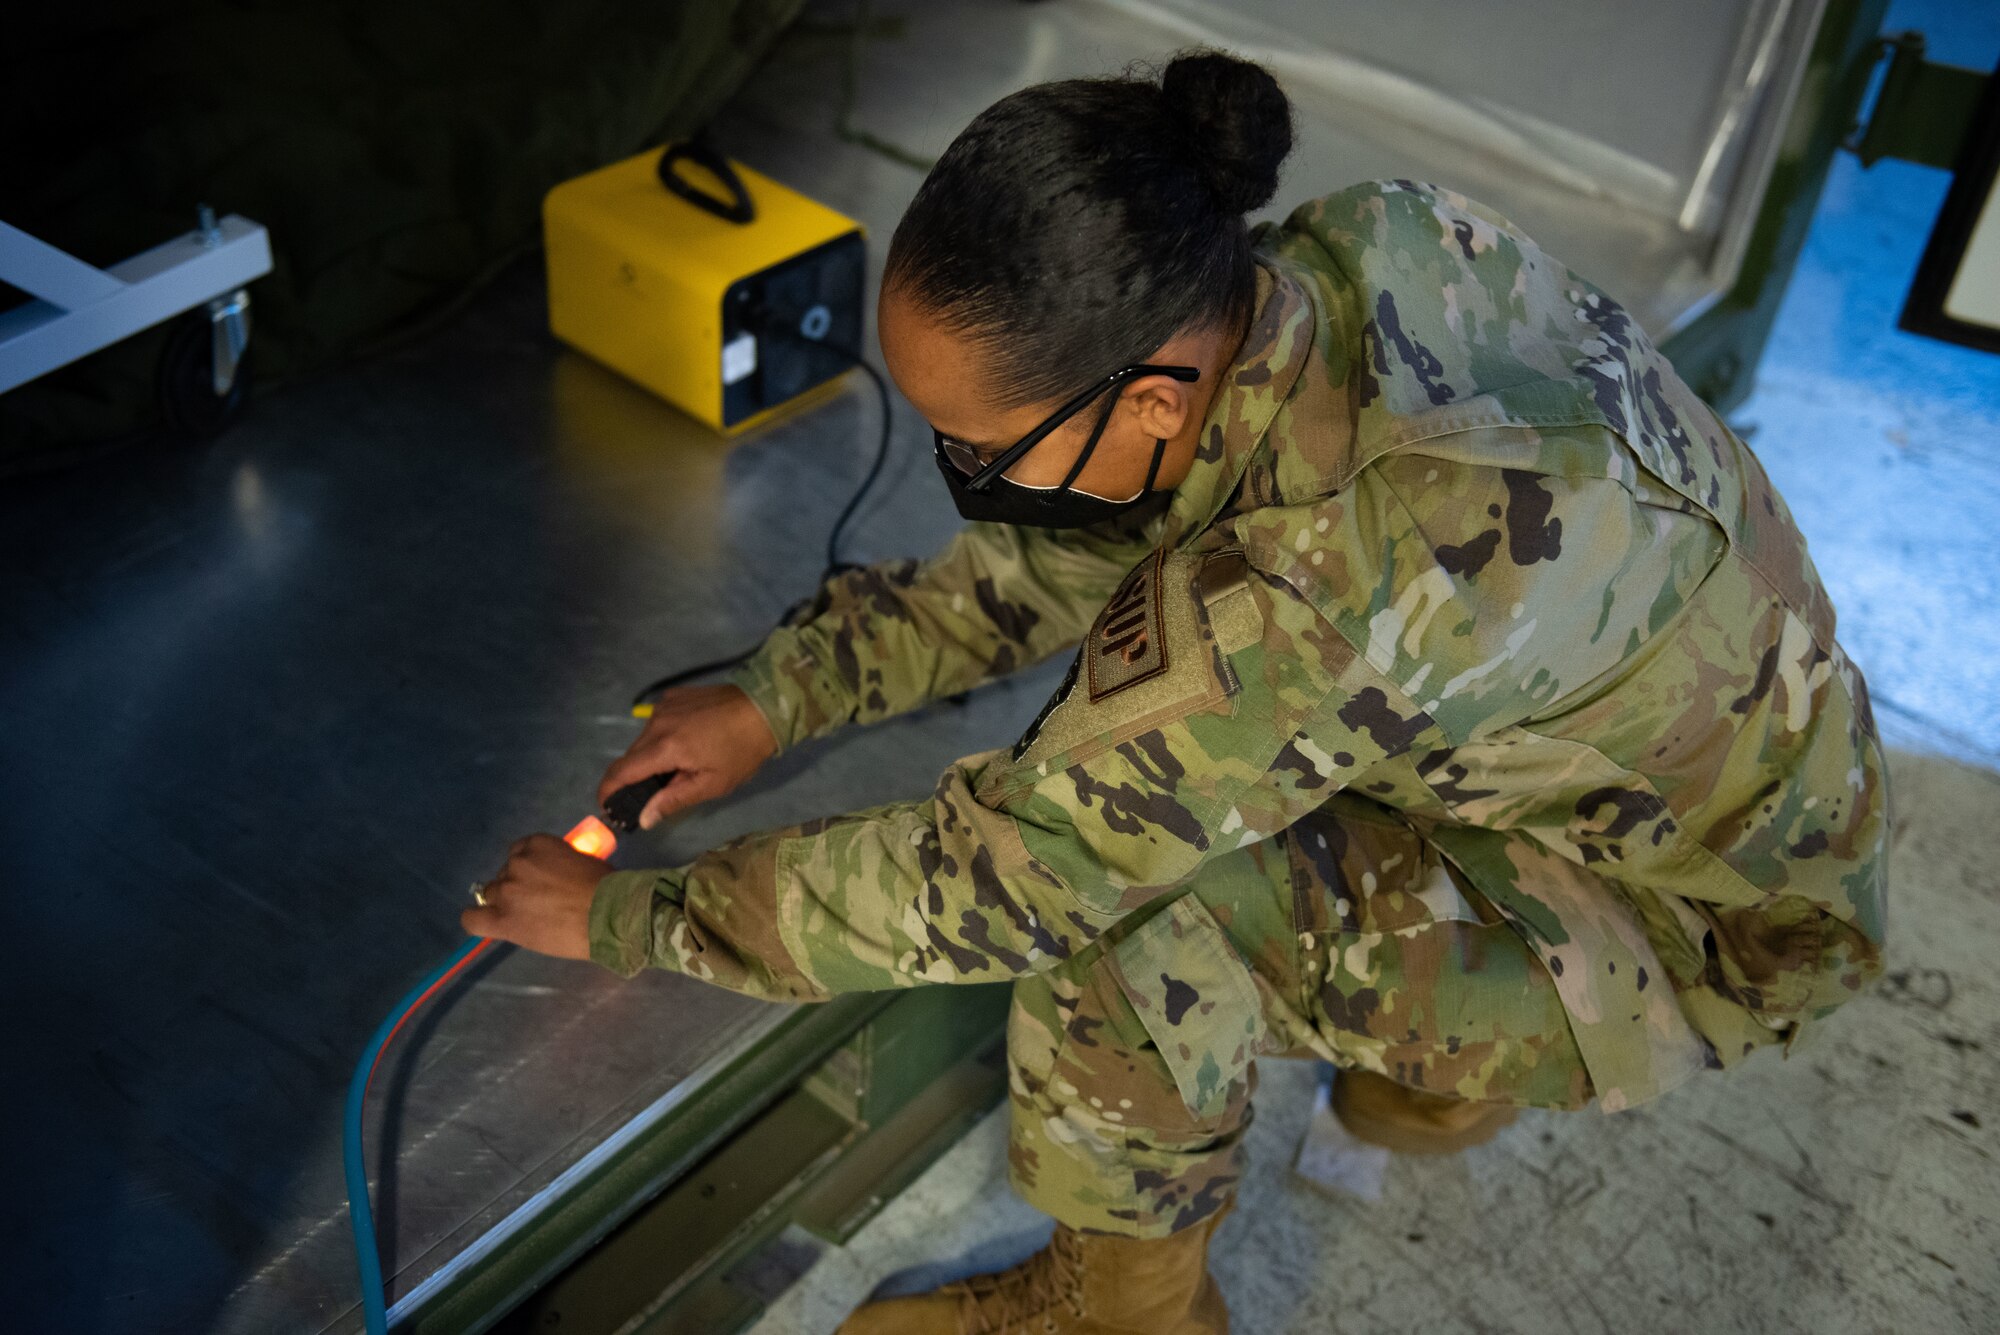 U.S. Air Force Master Sgt. Adriane M. Pope, 87th Logistics Readiness Squadron individual protective equipment section chief, plugs in a 10-lb ozone generator into an ISU-90 shipping container at Joint Base McGuire-Dix-Lakehurst, N.J., Feb. 10, 2022. This sanitation method is being tested in order to develop a less cumbersome solution for cleaning deployment gear. (U.S. Air Force photo by Airman 1st Class Sergio Avalos)